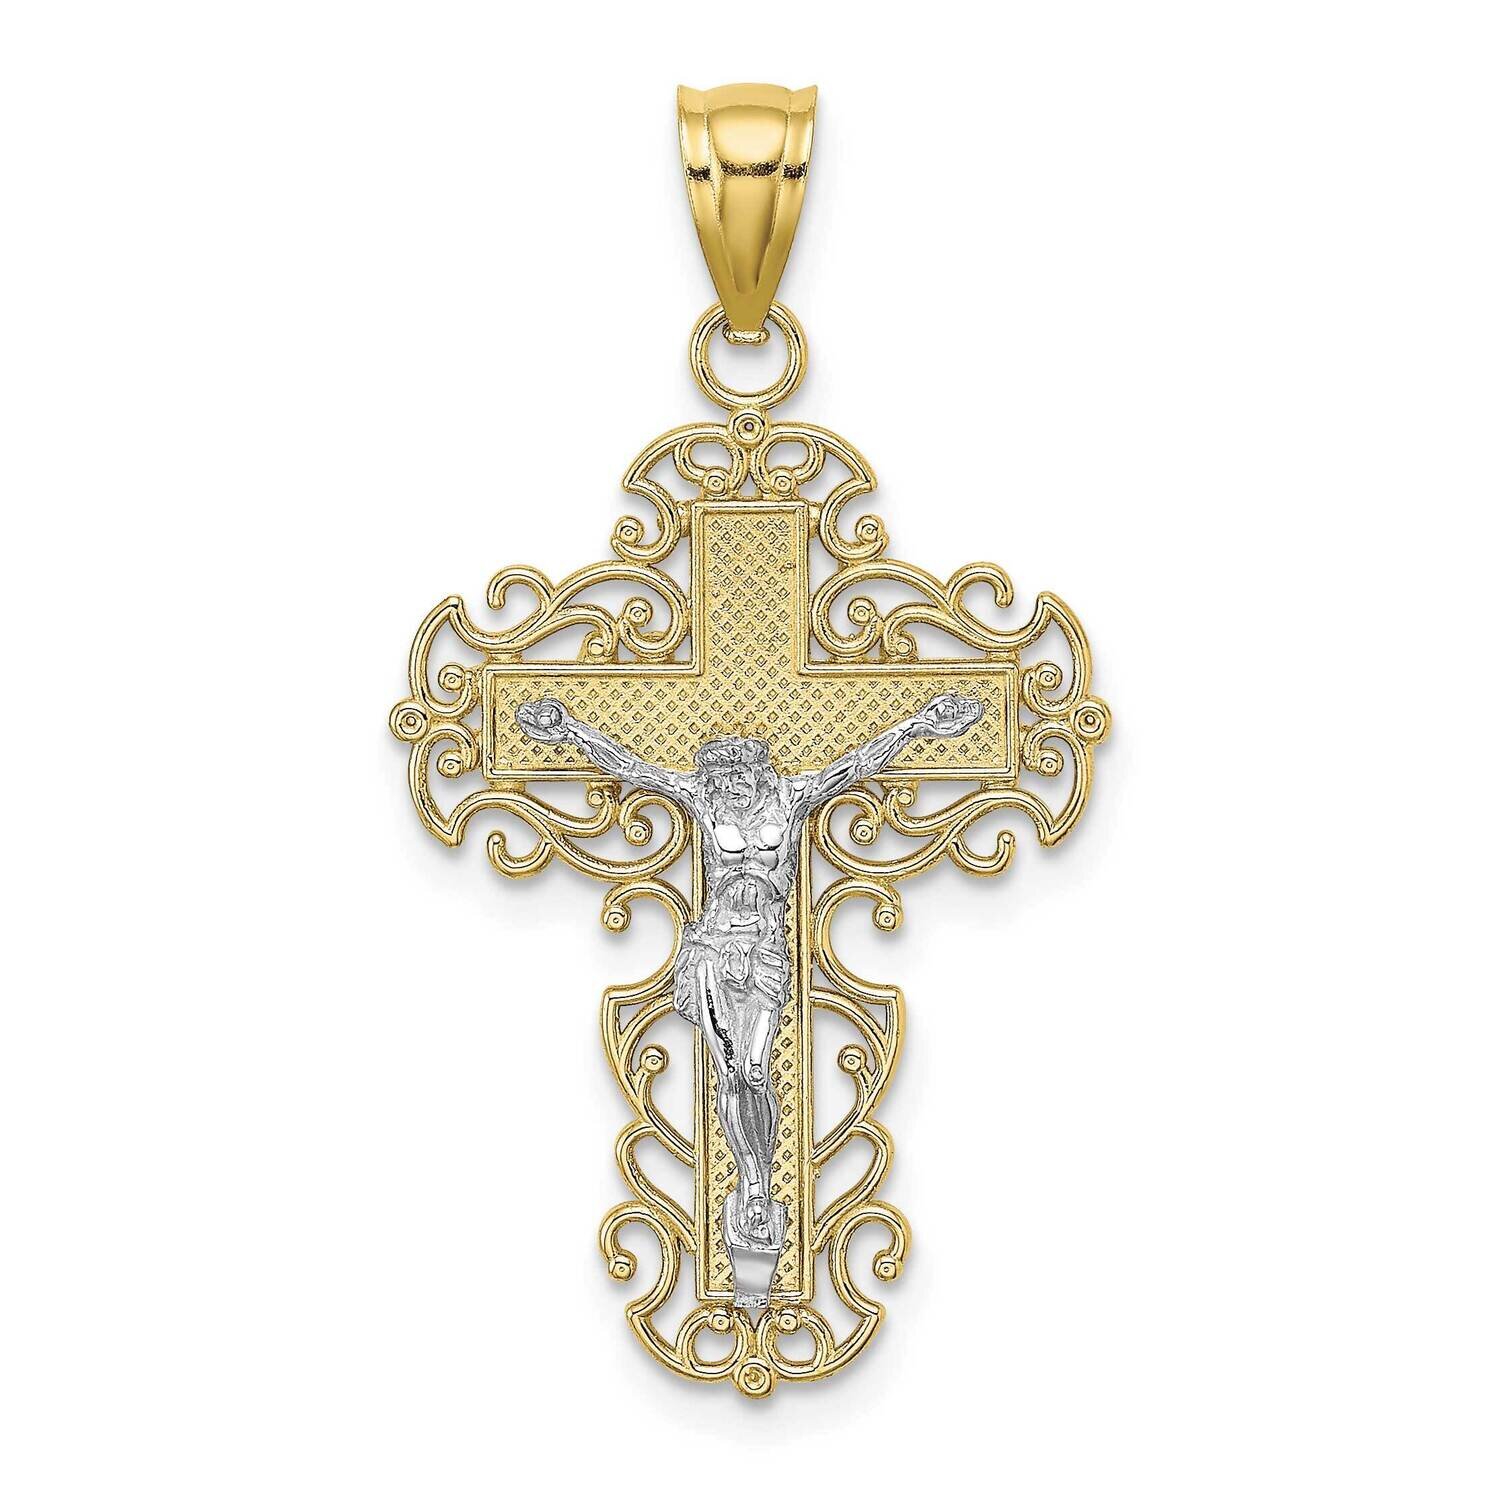 Two-Tone with Lace Trim Crucifix Charm 10k Gold 10K9286